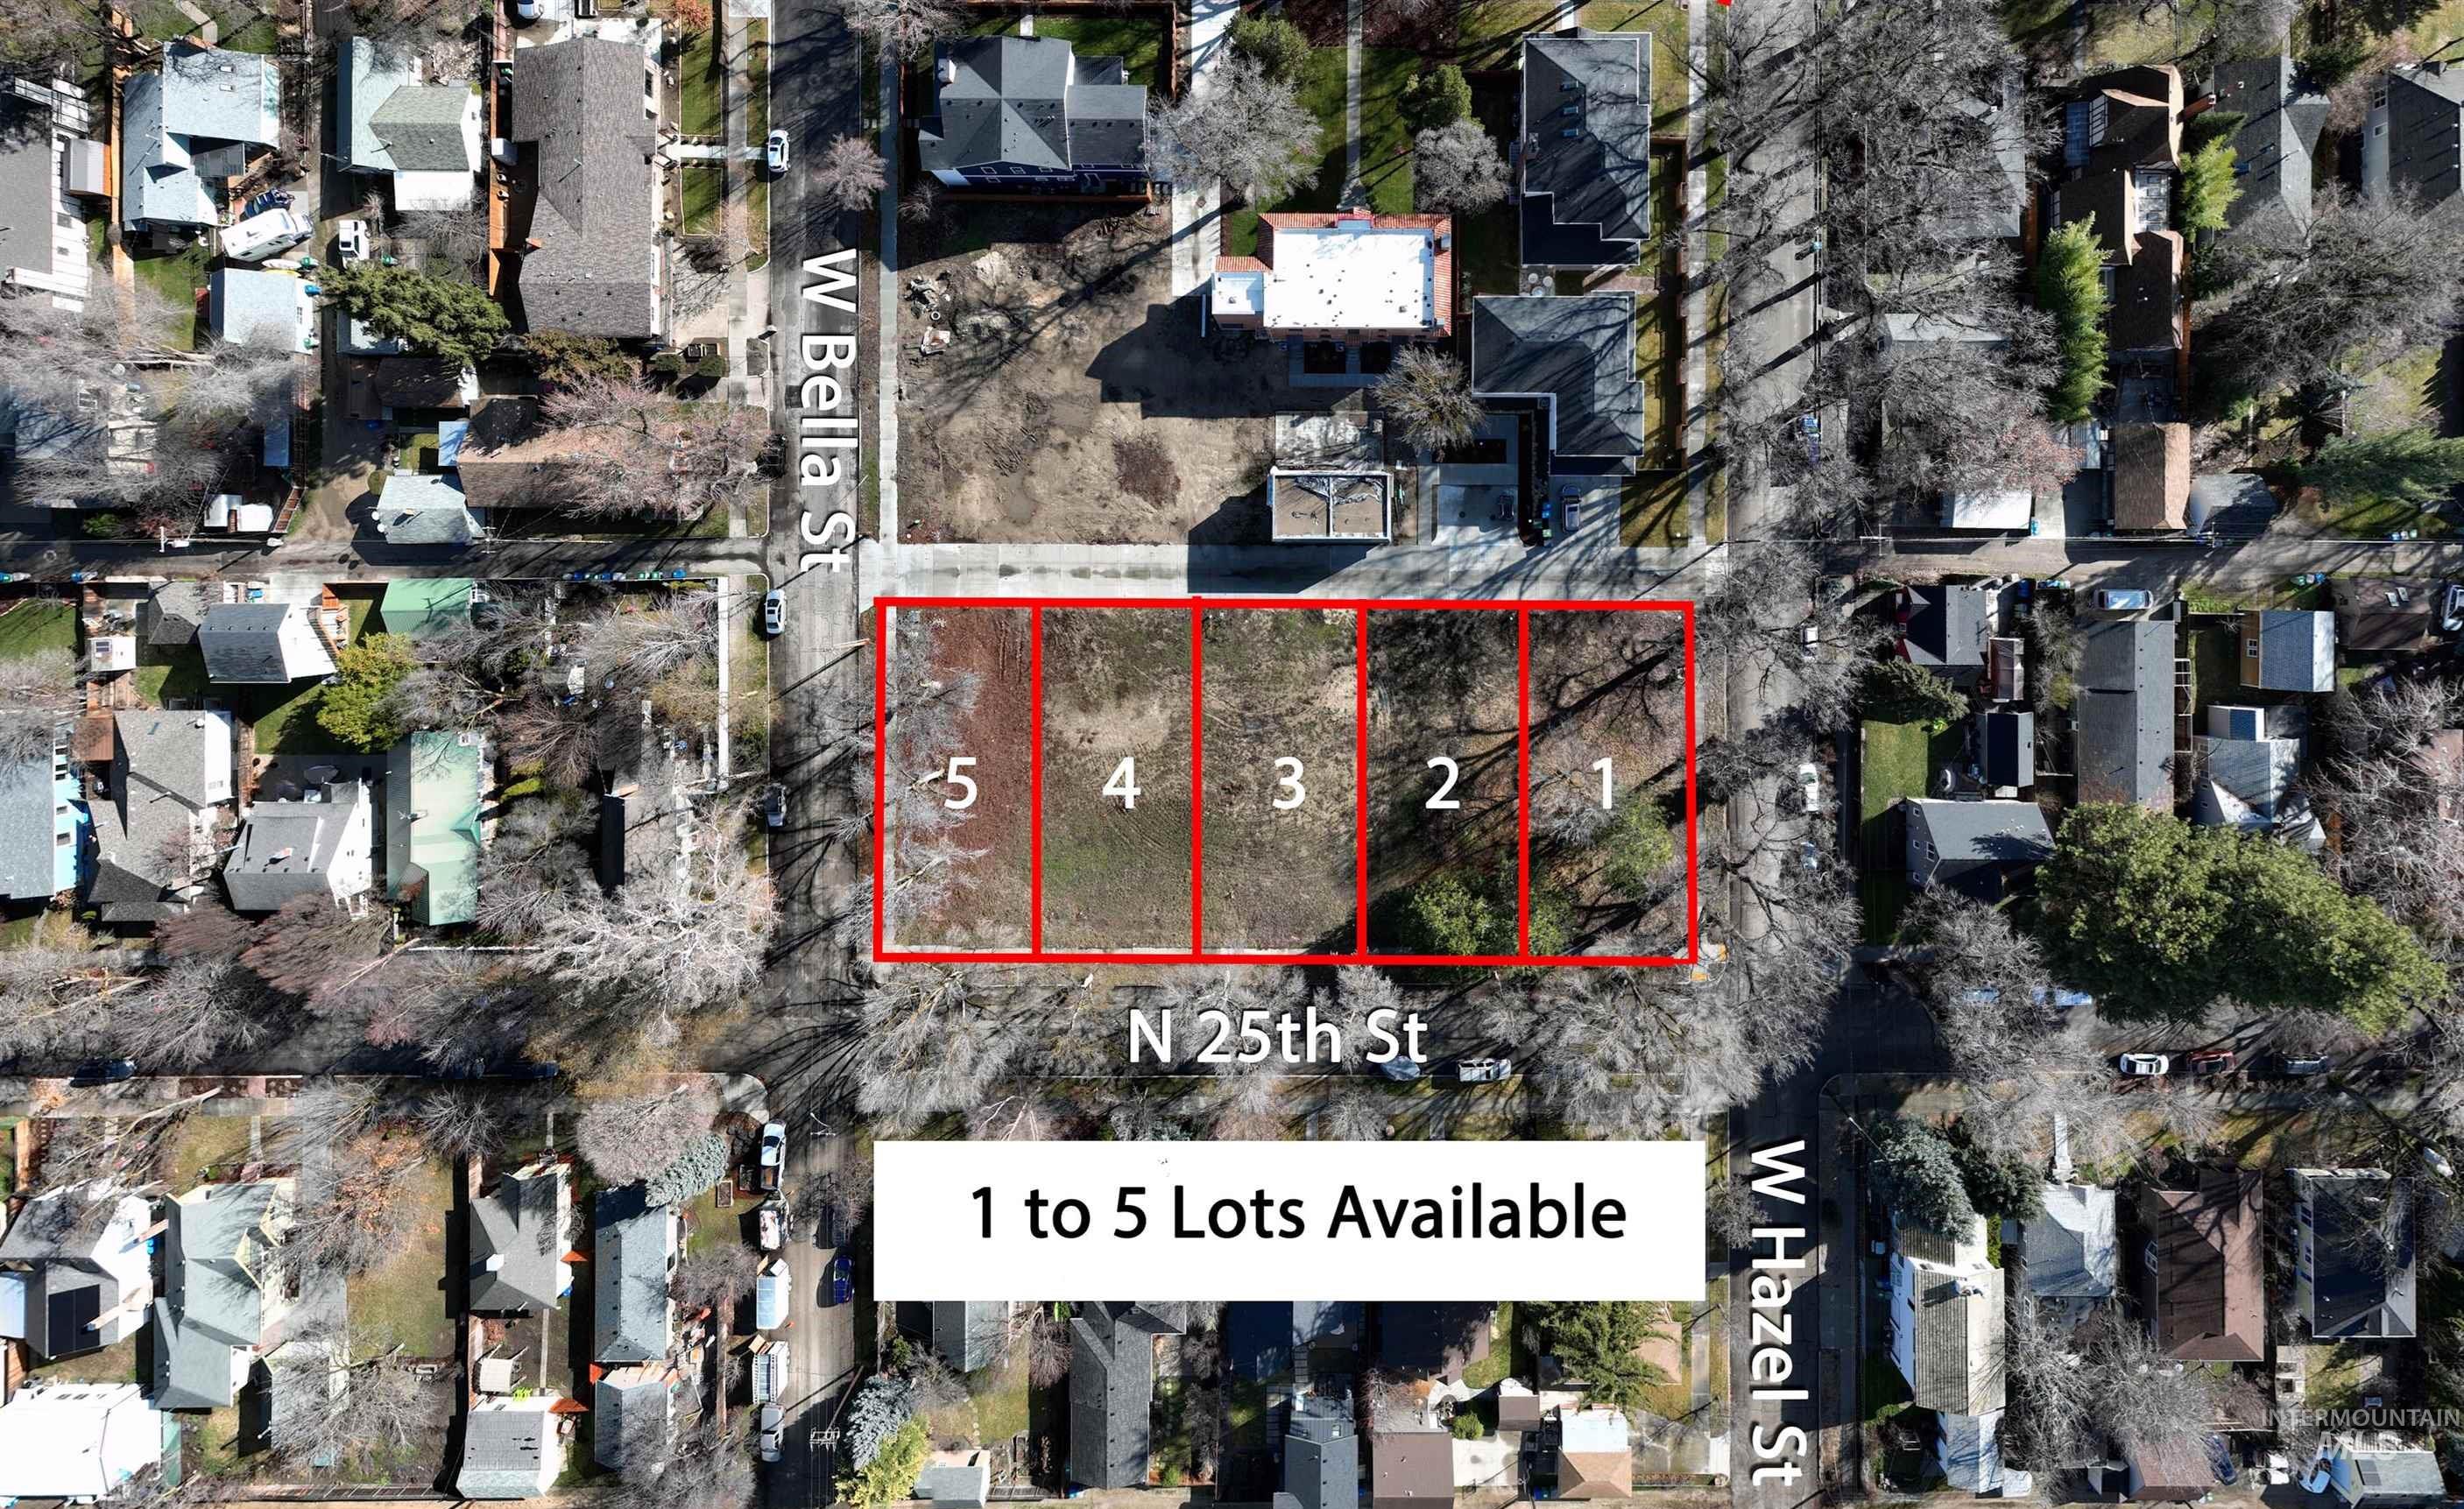 1610 N 25th St., Boise, Idaho 83702, Land For Sale, Price $495,000,MLS 98902343